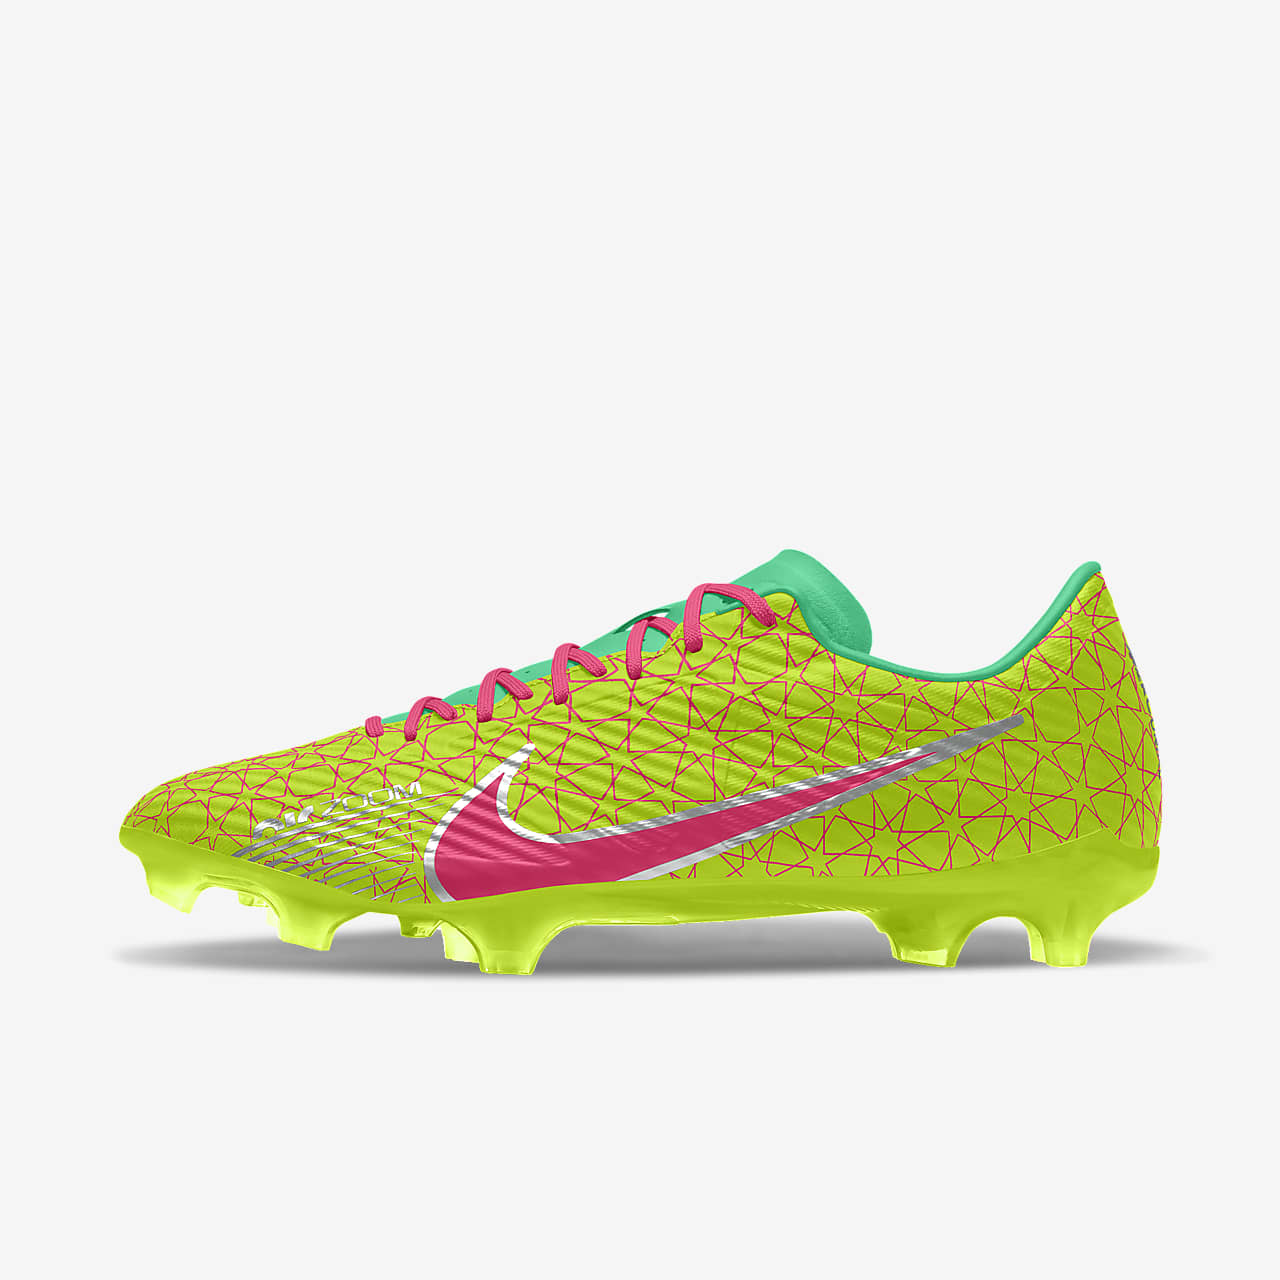 Chaussure de football à crampons multi-surfaces personnalisable Nike Zoom Mercurial Vapor 15 Academy FG/MG By You